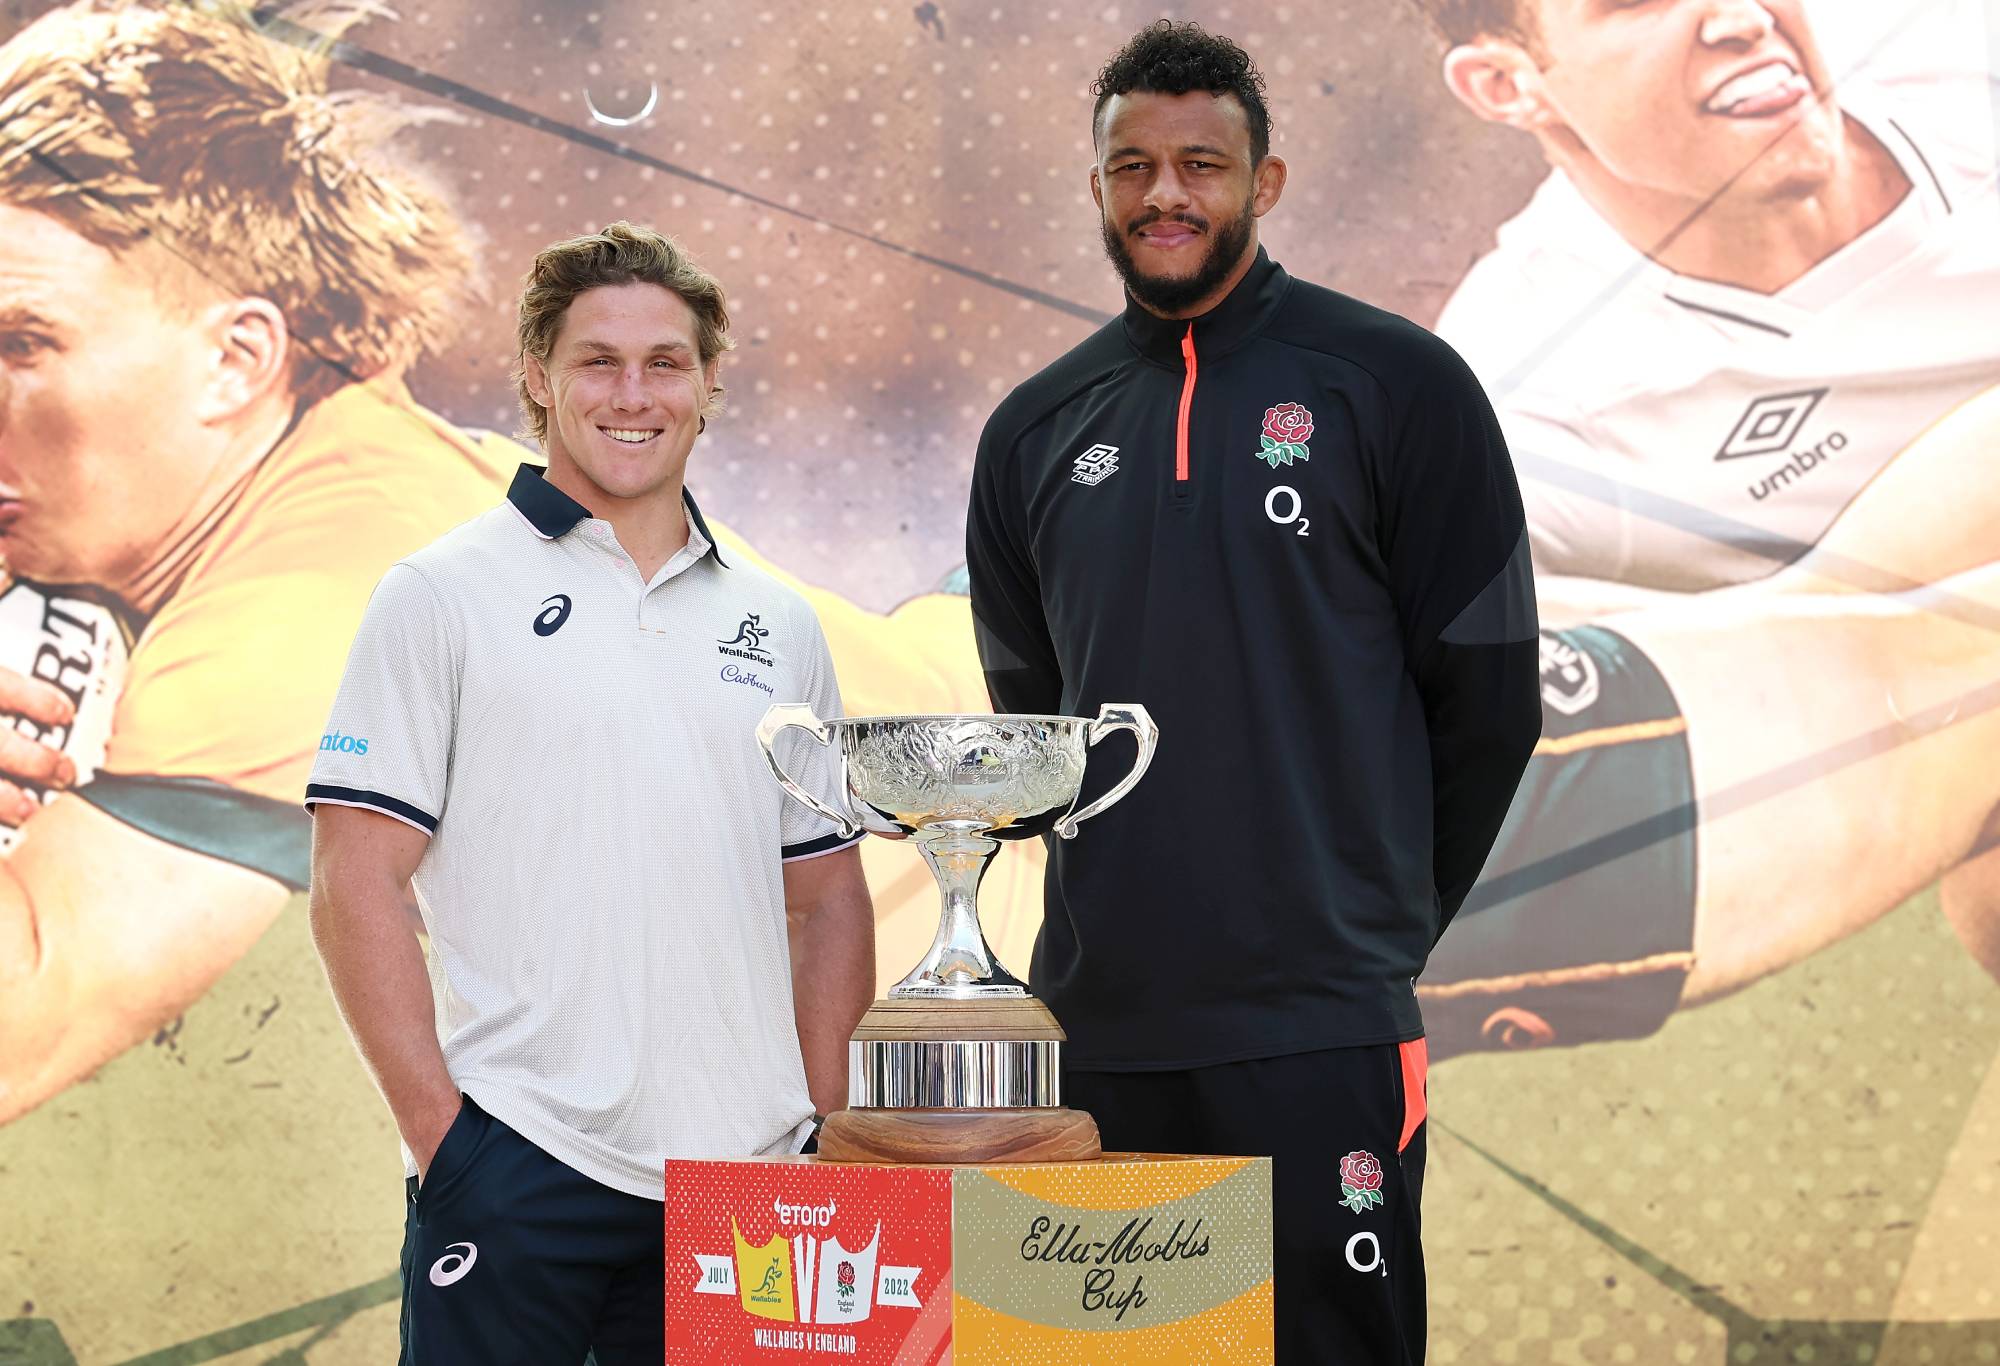 Wallabies captain Michael Hooper and England captain Courtney Lawes pose with the Ella-Mobbs Cup during a media opportunity ahead of the Wallabies v England Test series, at Forrest Place on July 01, 2022 in Perth, Australia. (Photo by Paul Kane/Getty Images)